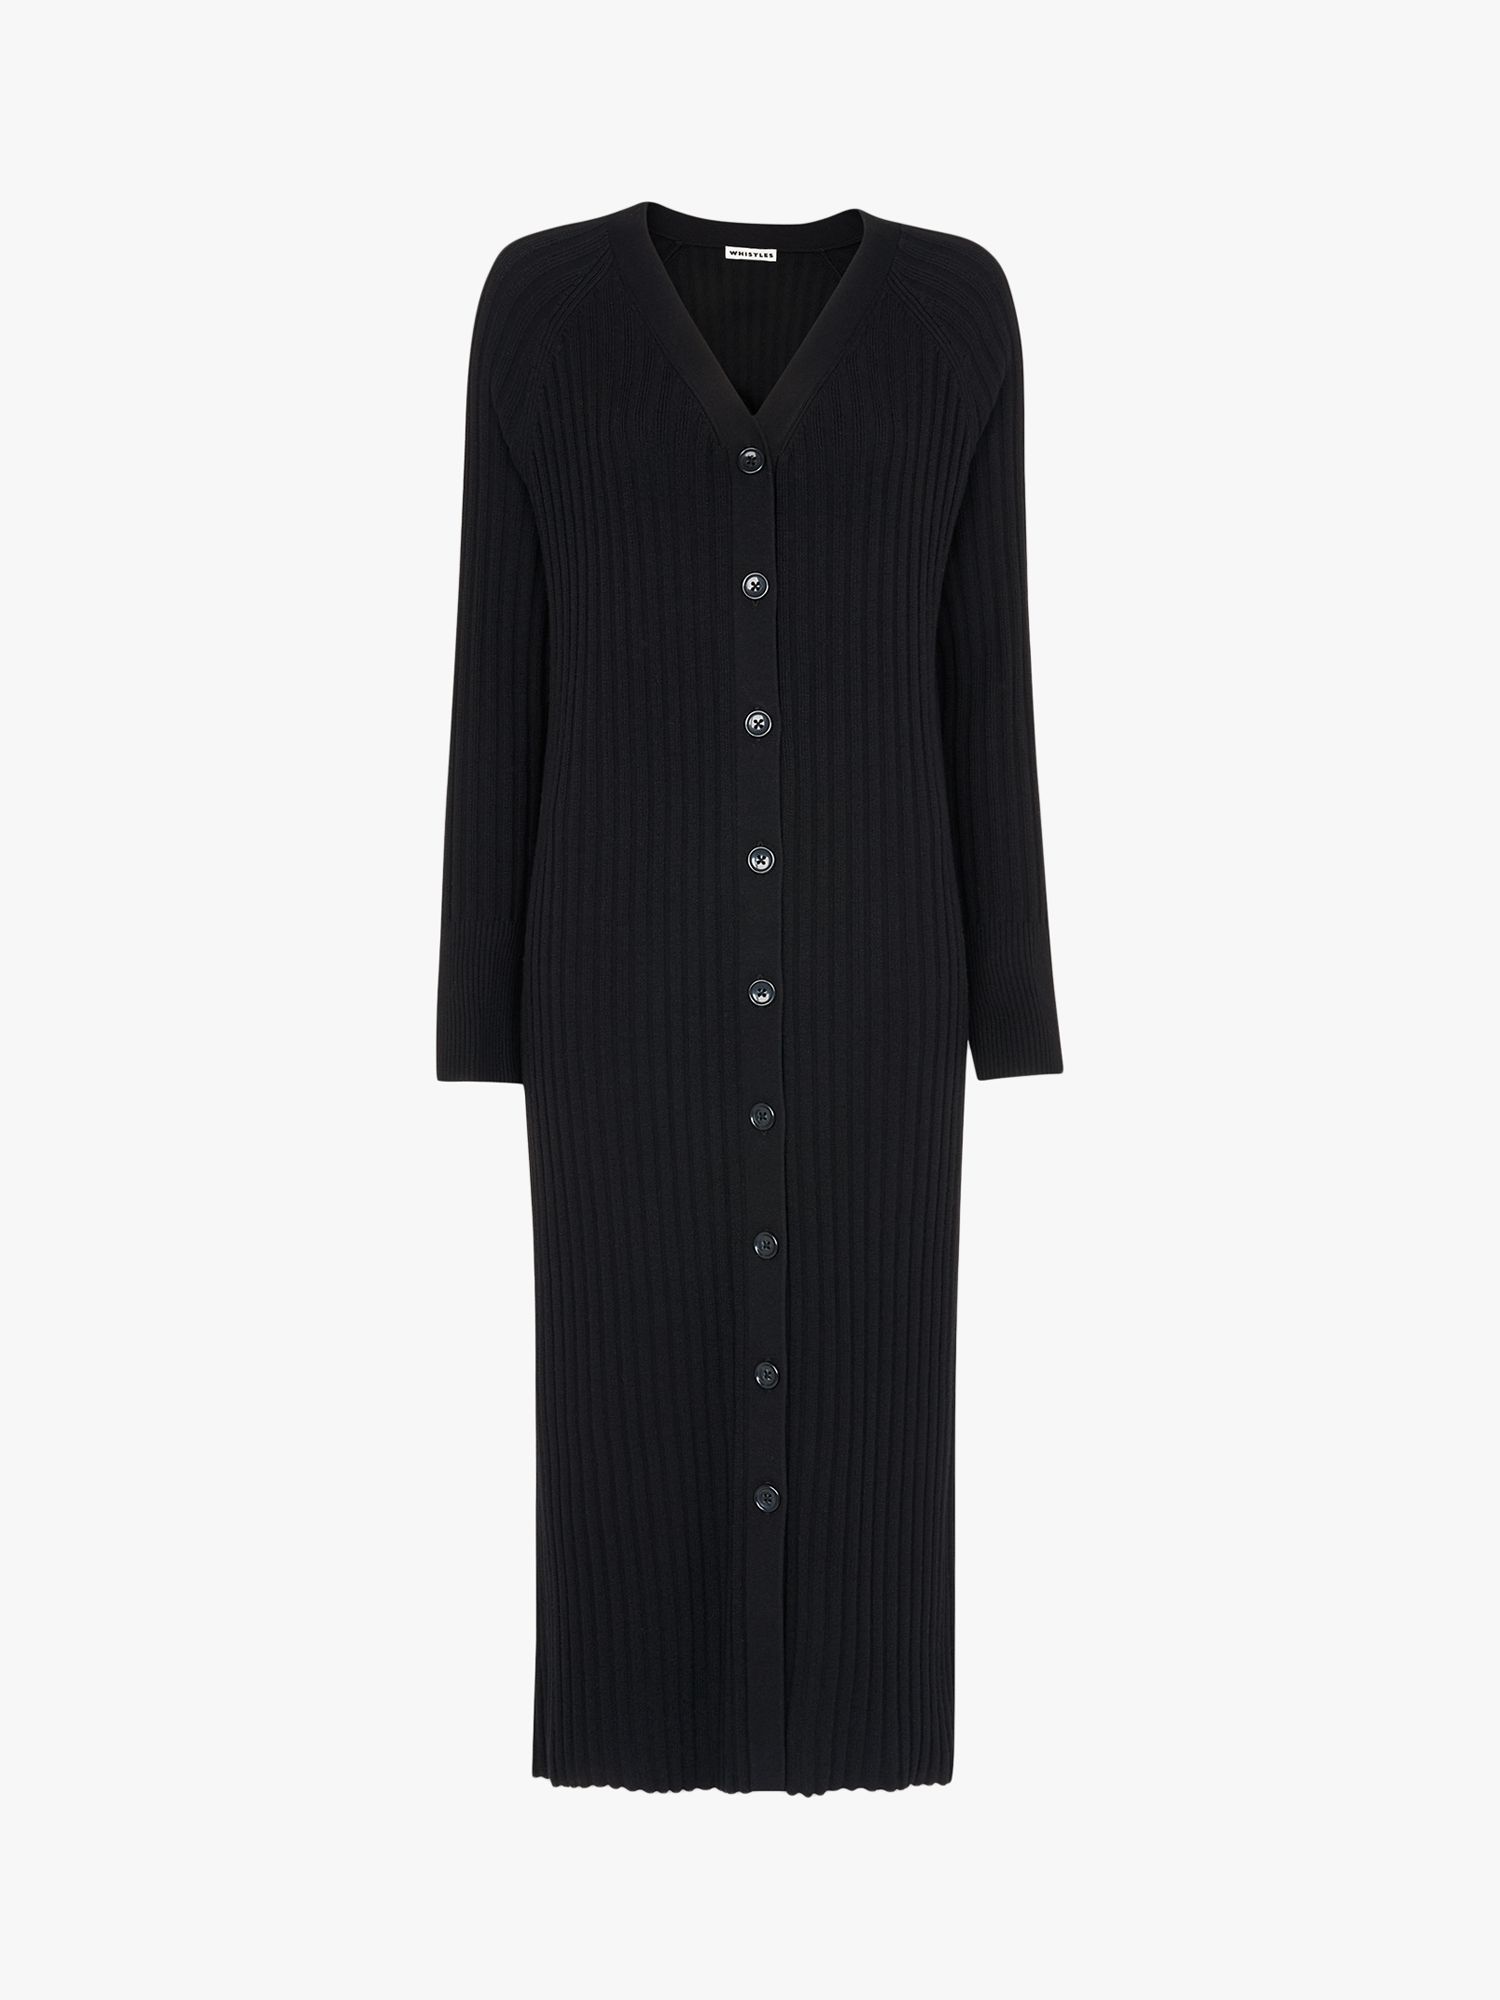 Whistles Nelly Ribbed Cardigan Dress, Black at John Lewis & Partners